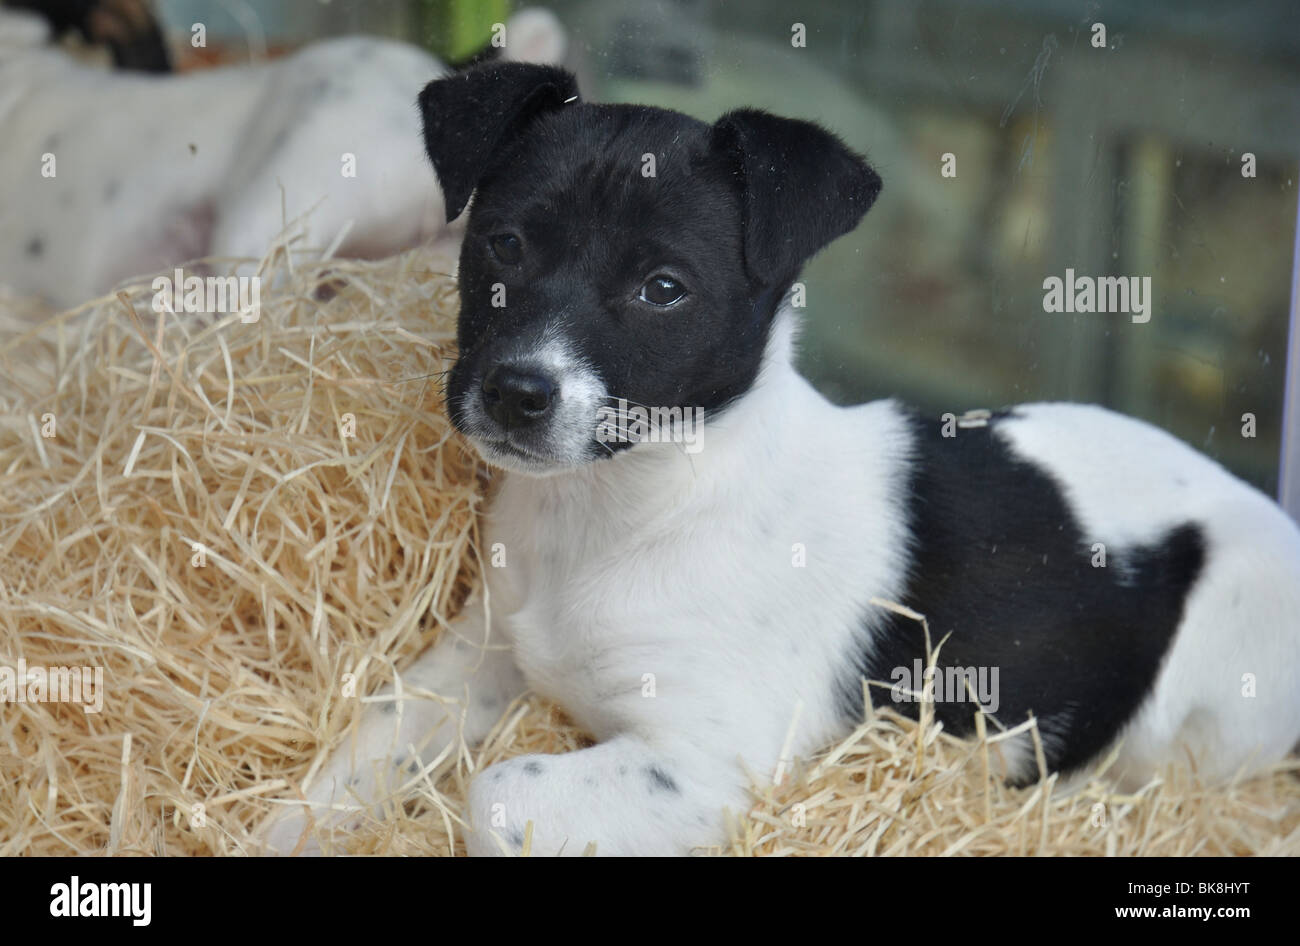 Puppies for sale  in shop window Stock Photo